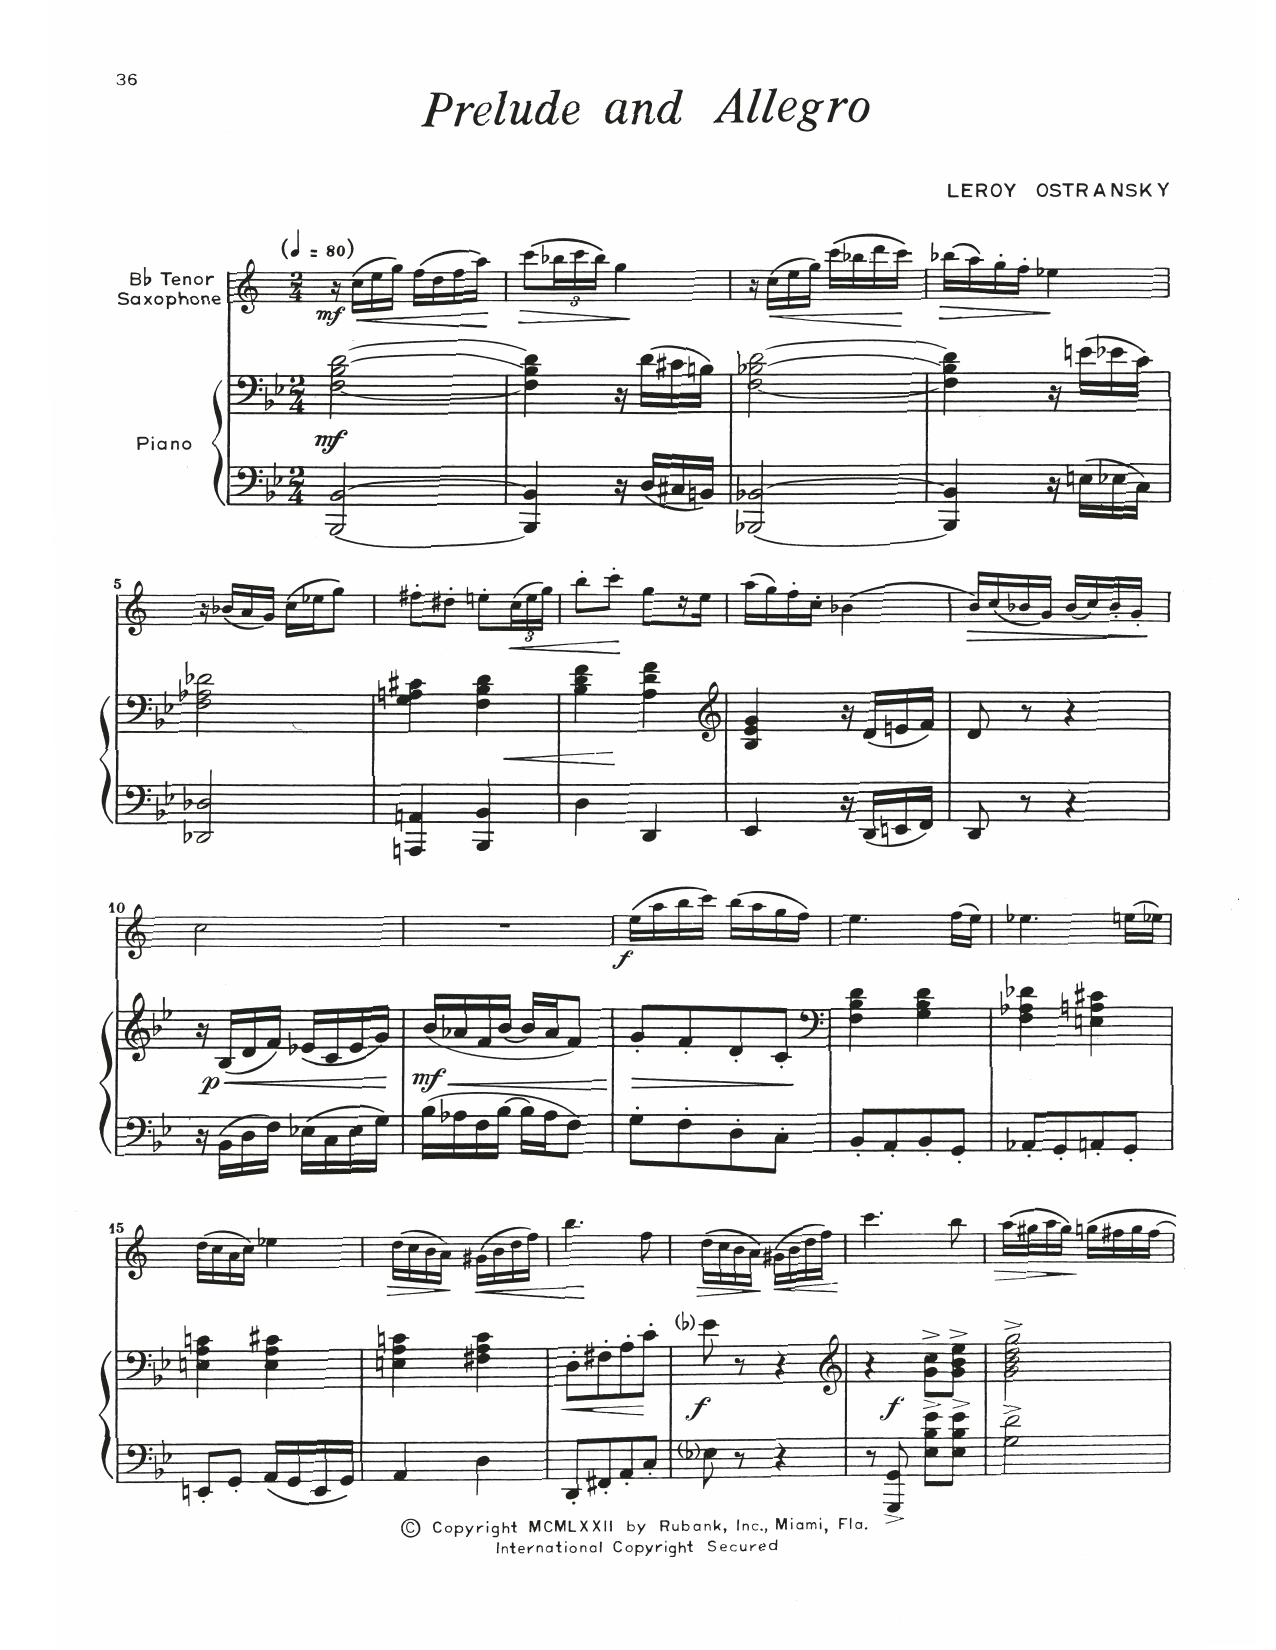 Download Leroy Ostransky Prelude And Allegro Sheet Music